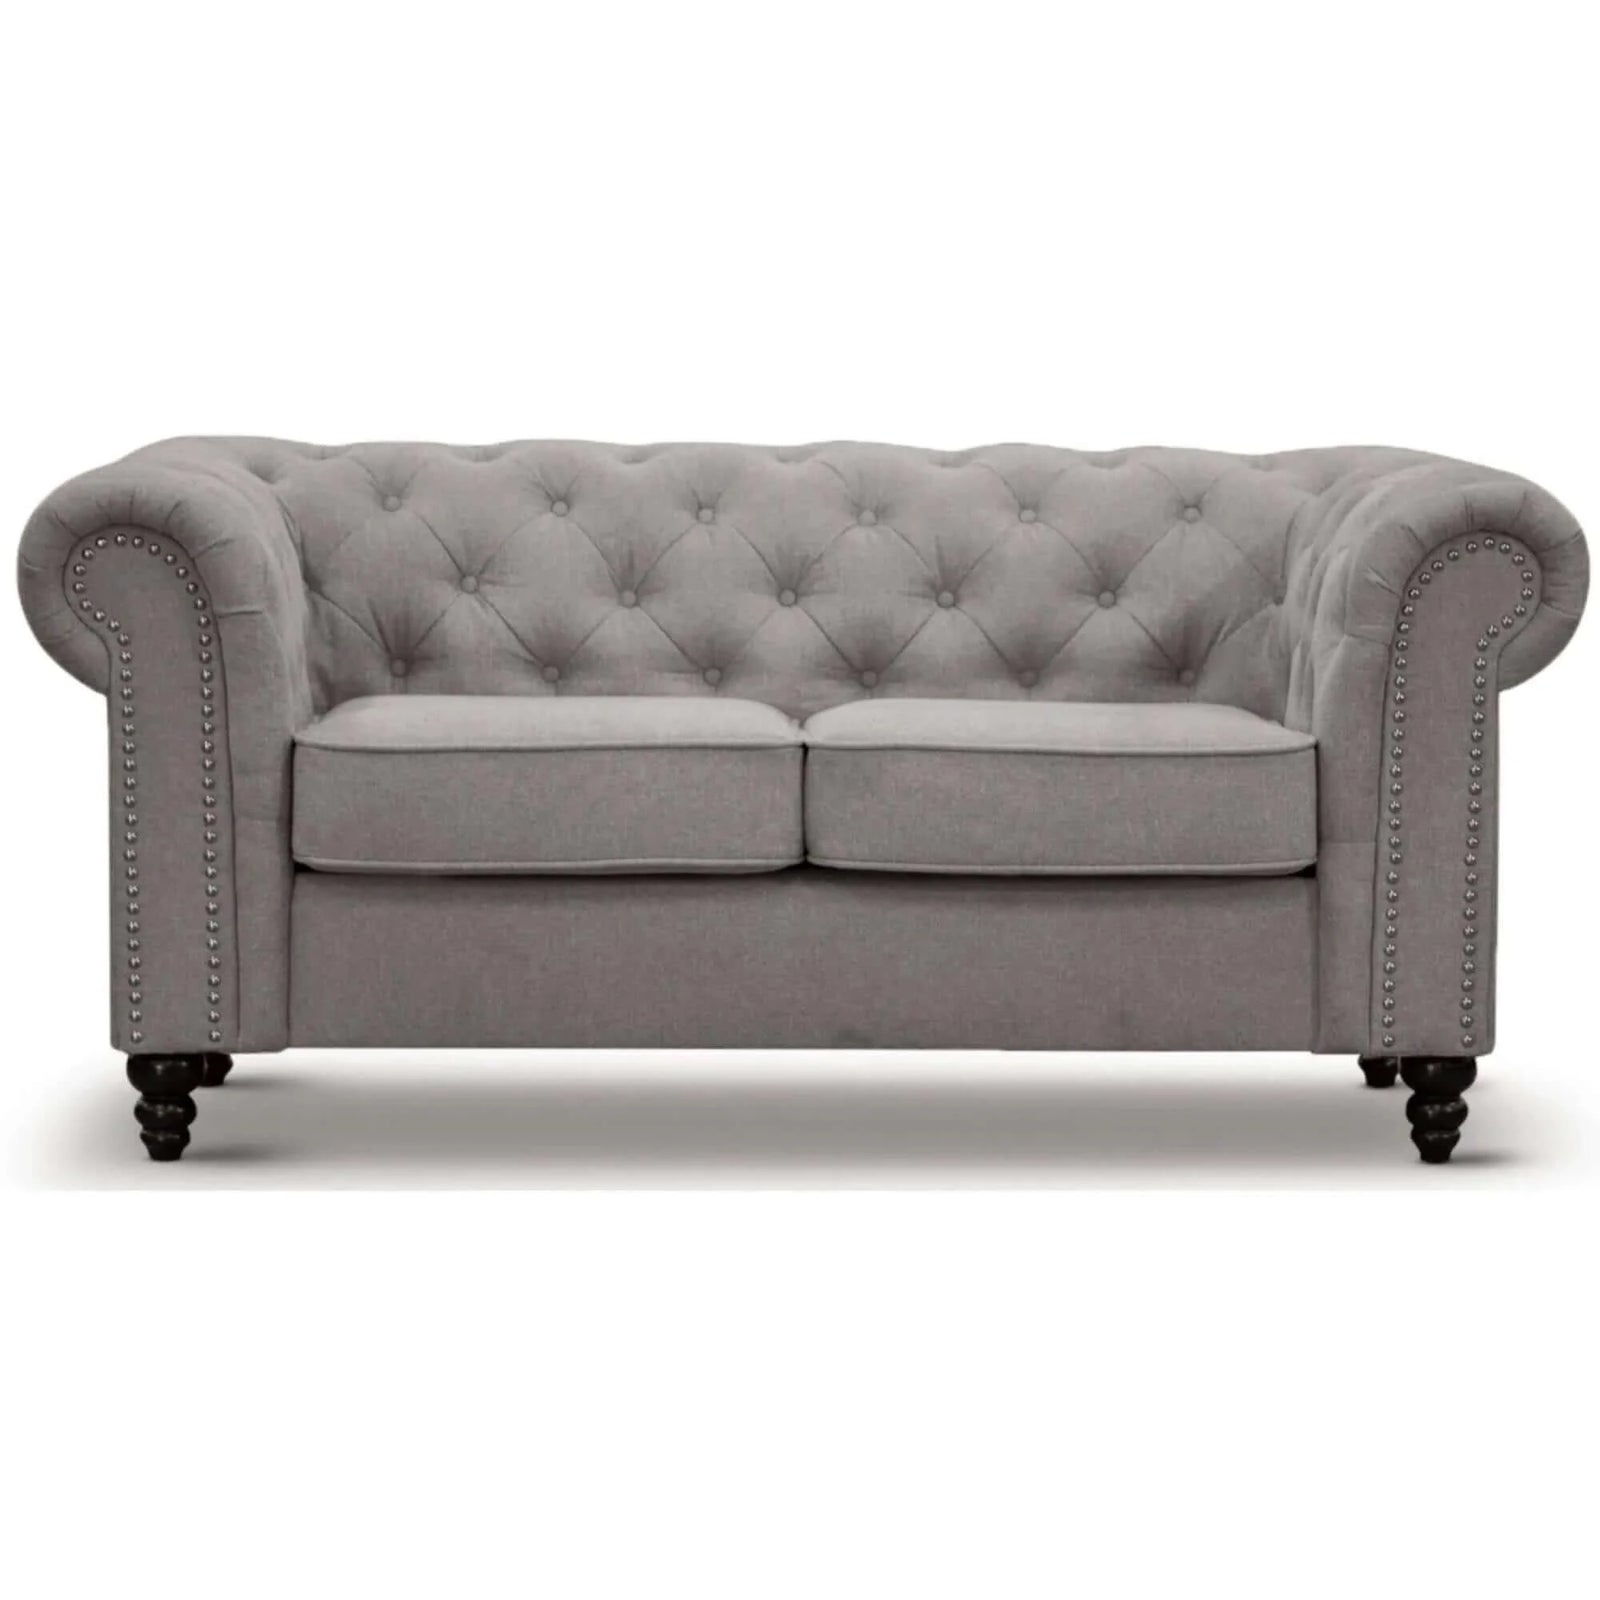 Mellowly 2 Seater Sofa Fabric Uplholstered Chesterfield Lounge Couch - Grey-Upinteriors